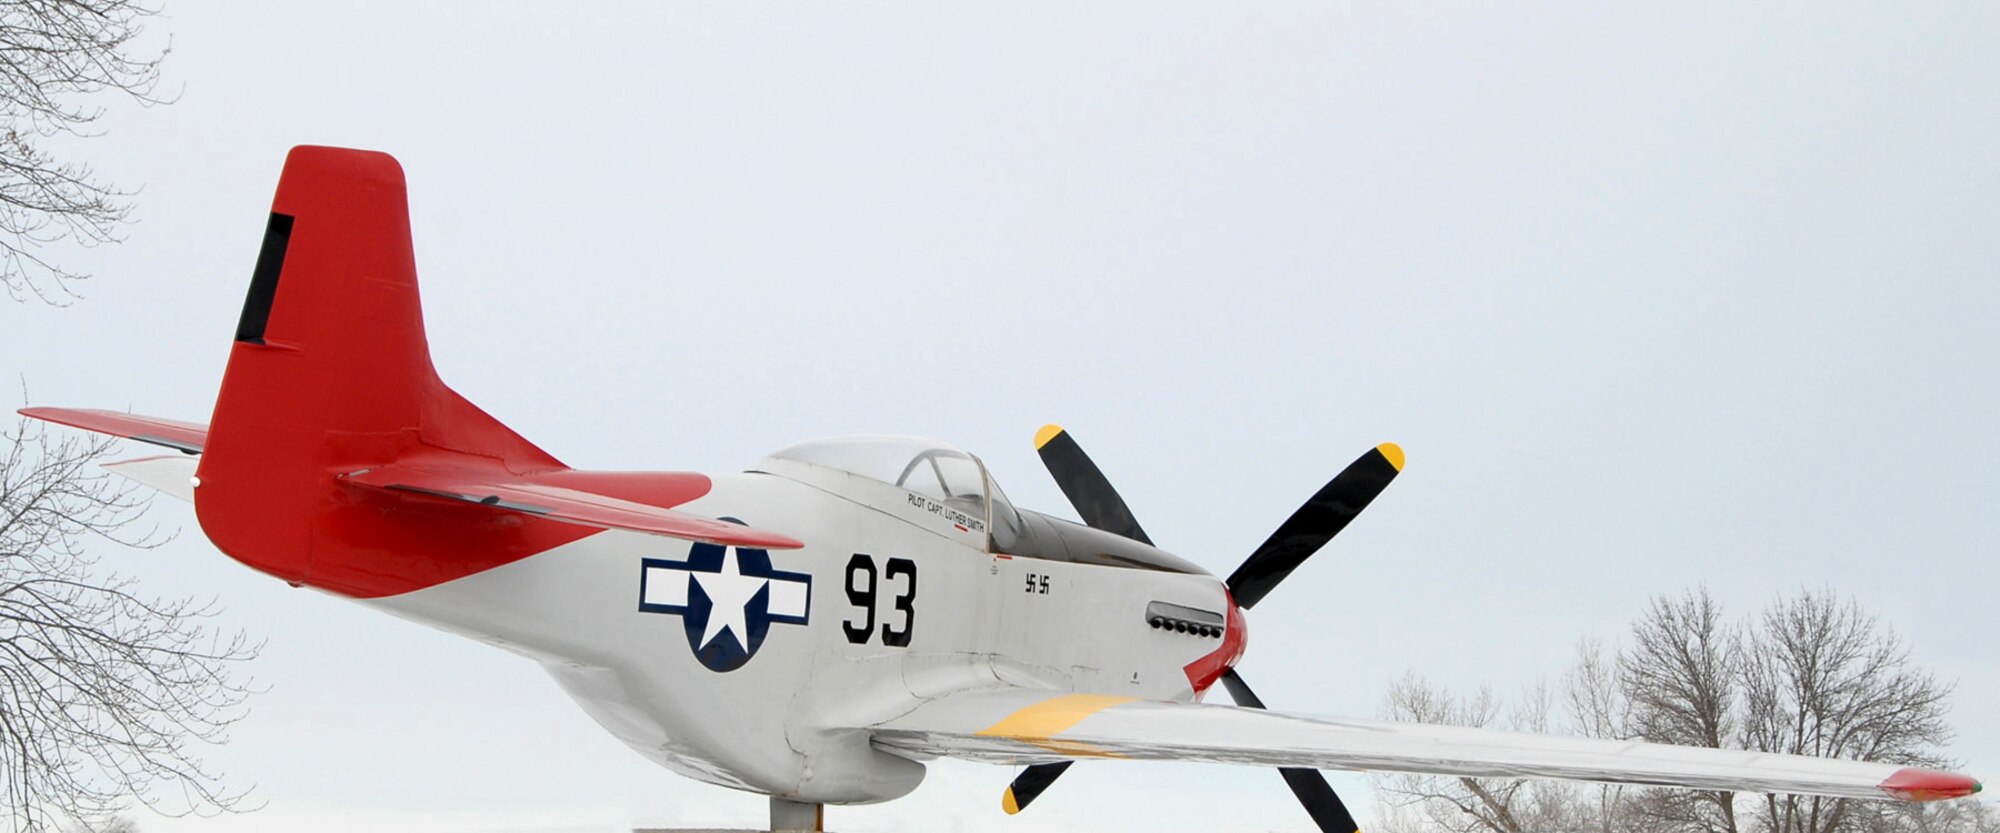 A replica of Capt. Luther Smith's P-51 on static display at the main gate of the 132nd Fighter Wing, Des Moines, Iowa, honors Iowa's Tuskegee Airmen for their contributions during World War II.